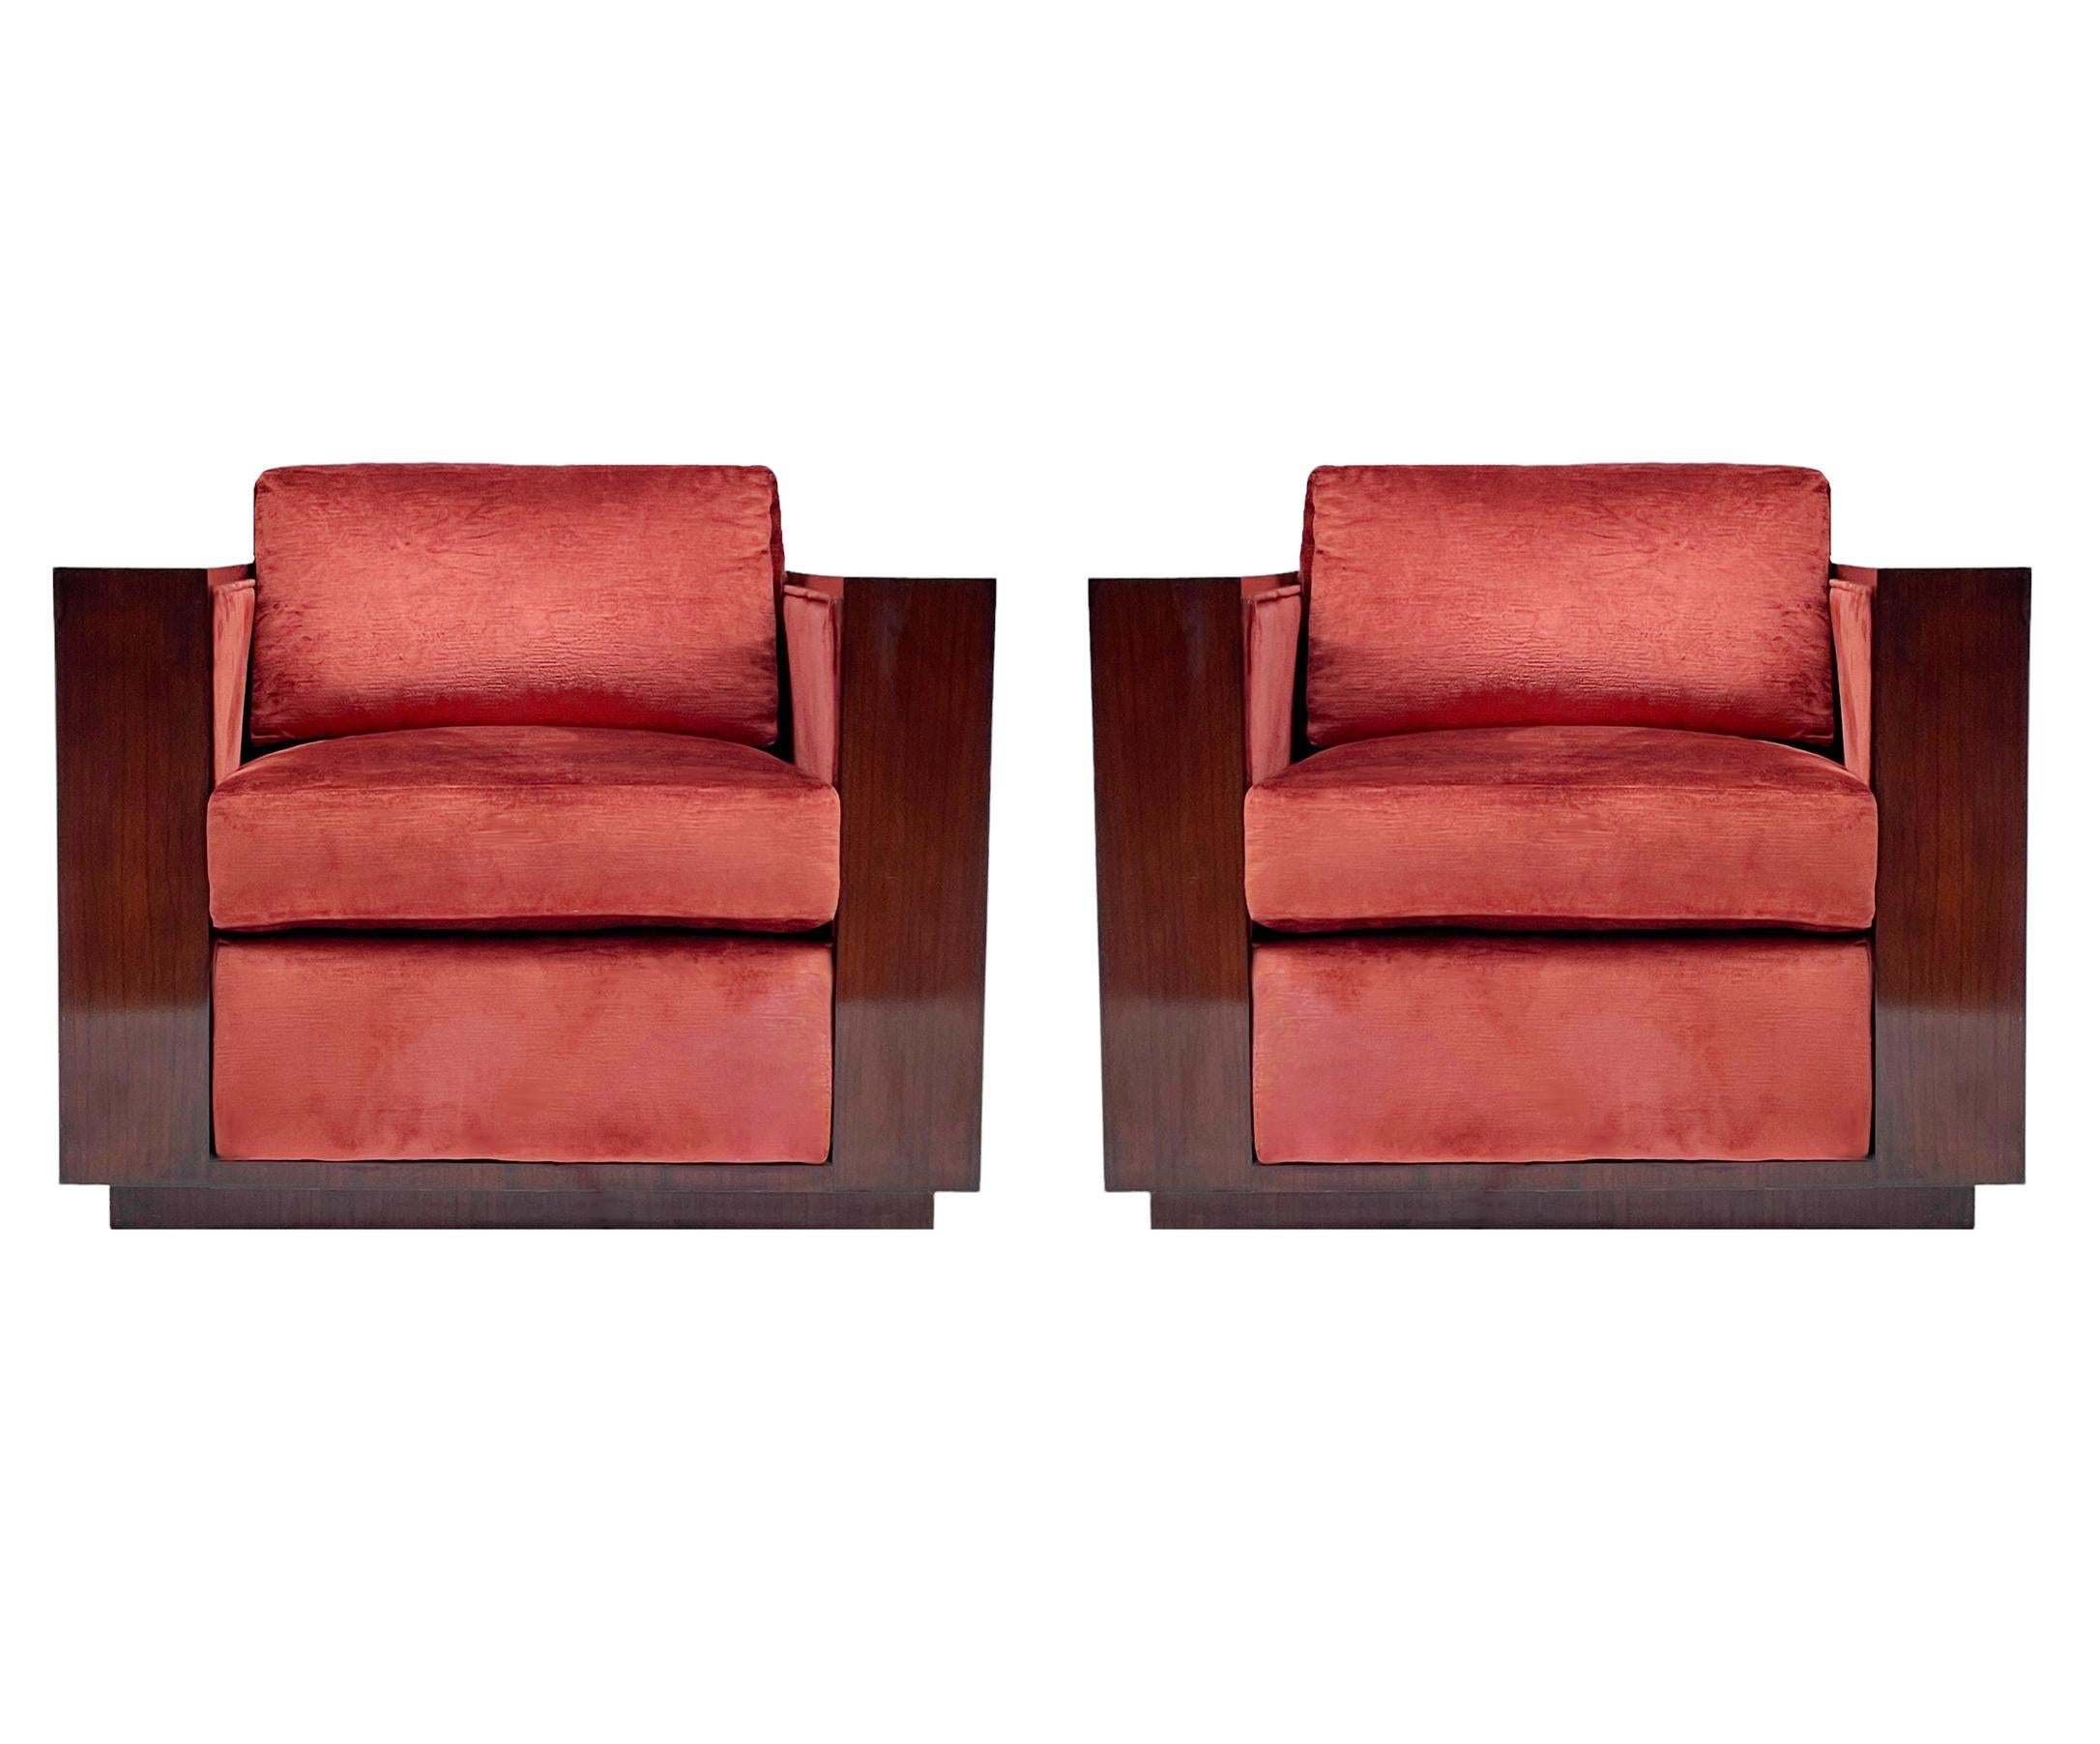 Pair of Mid Century Art Deco Mahogany Cube Club Chairs by Ralph Lauren  For Sale 1